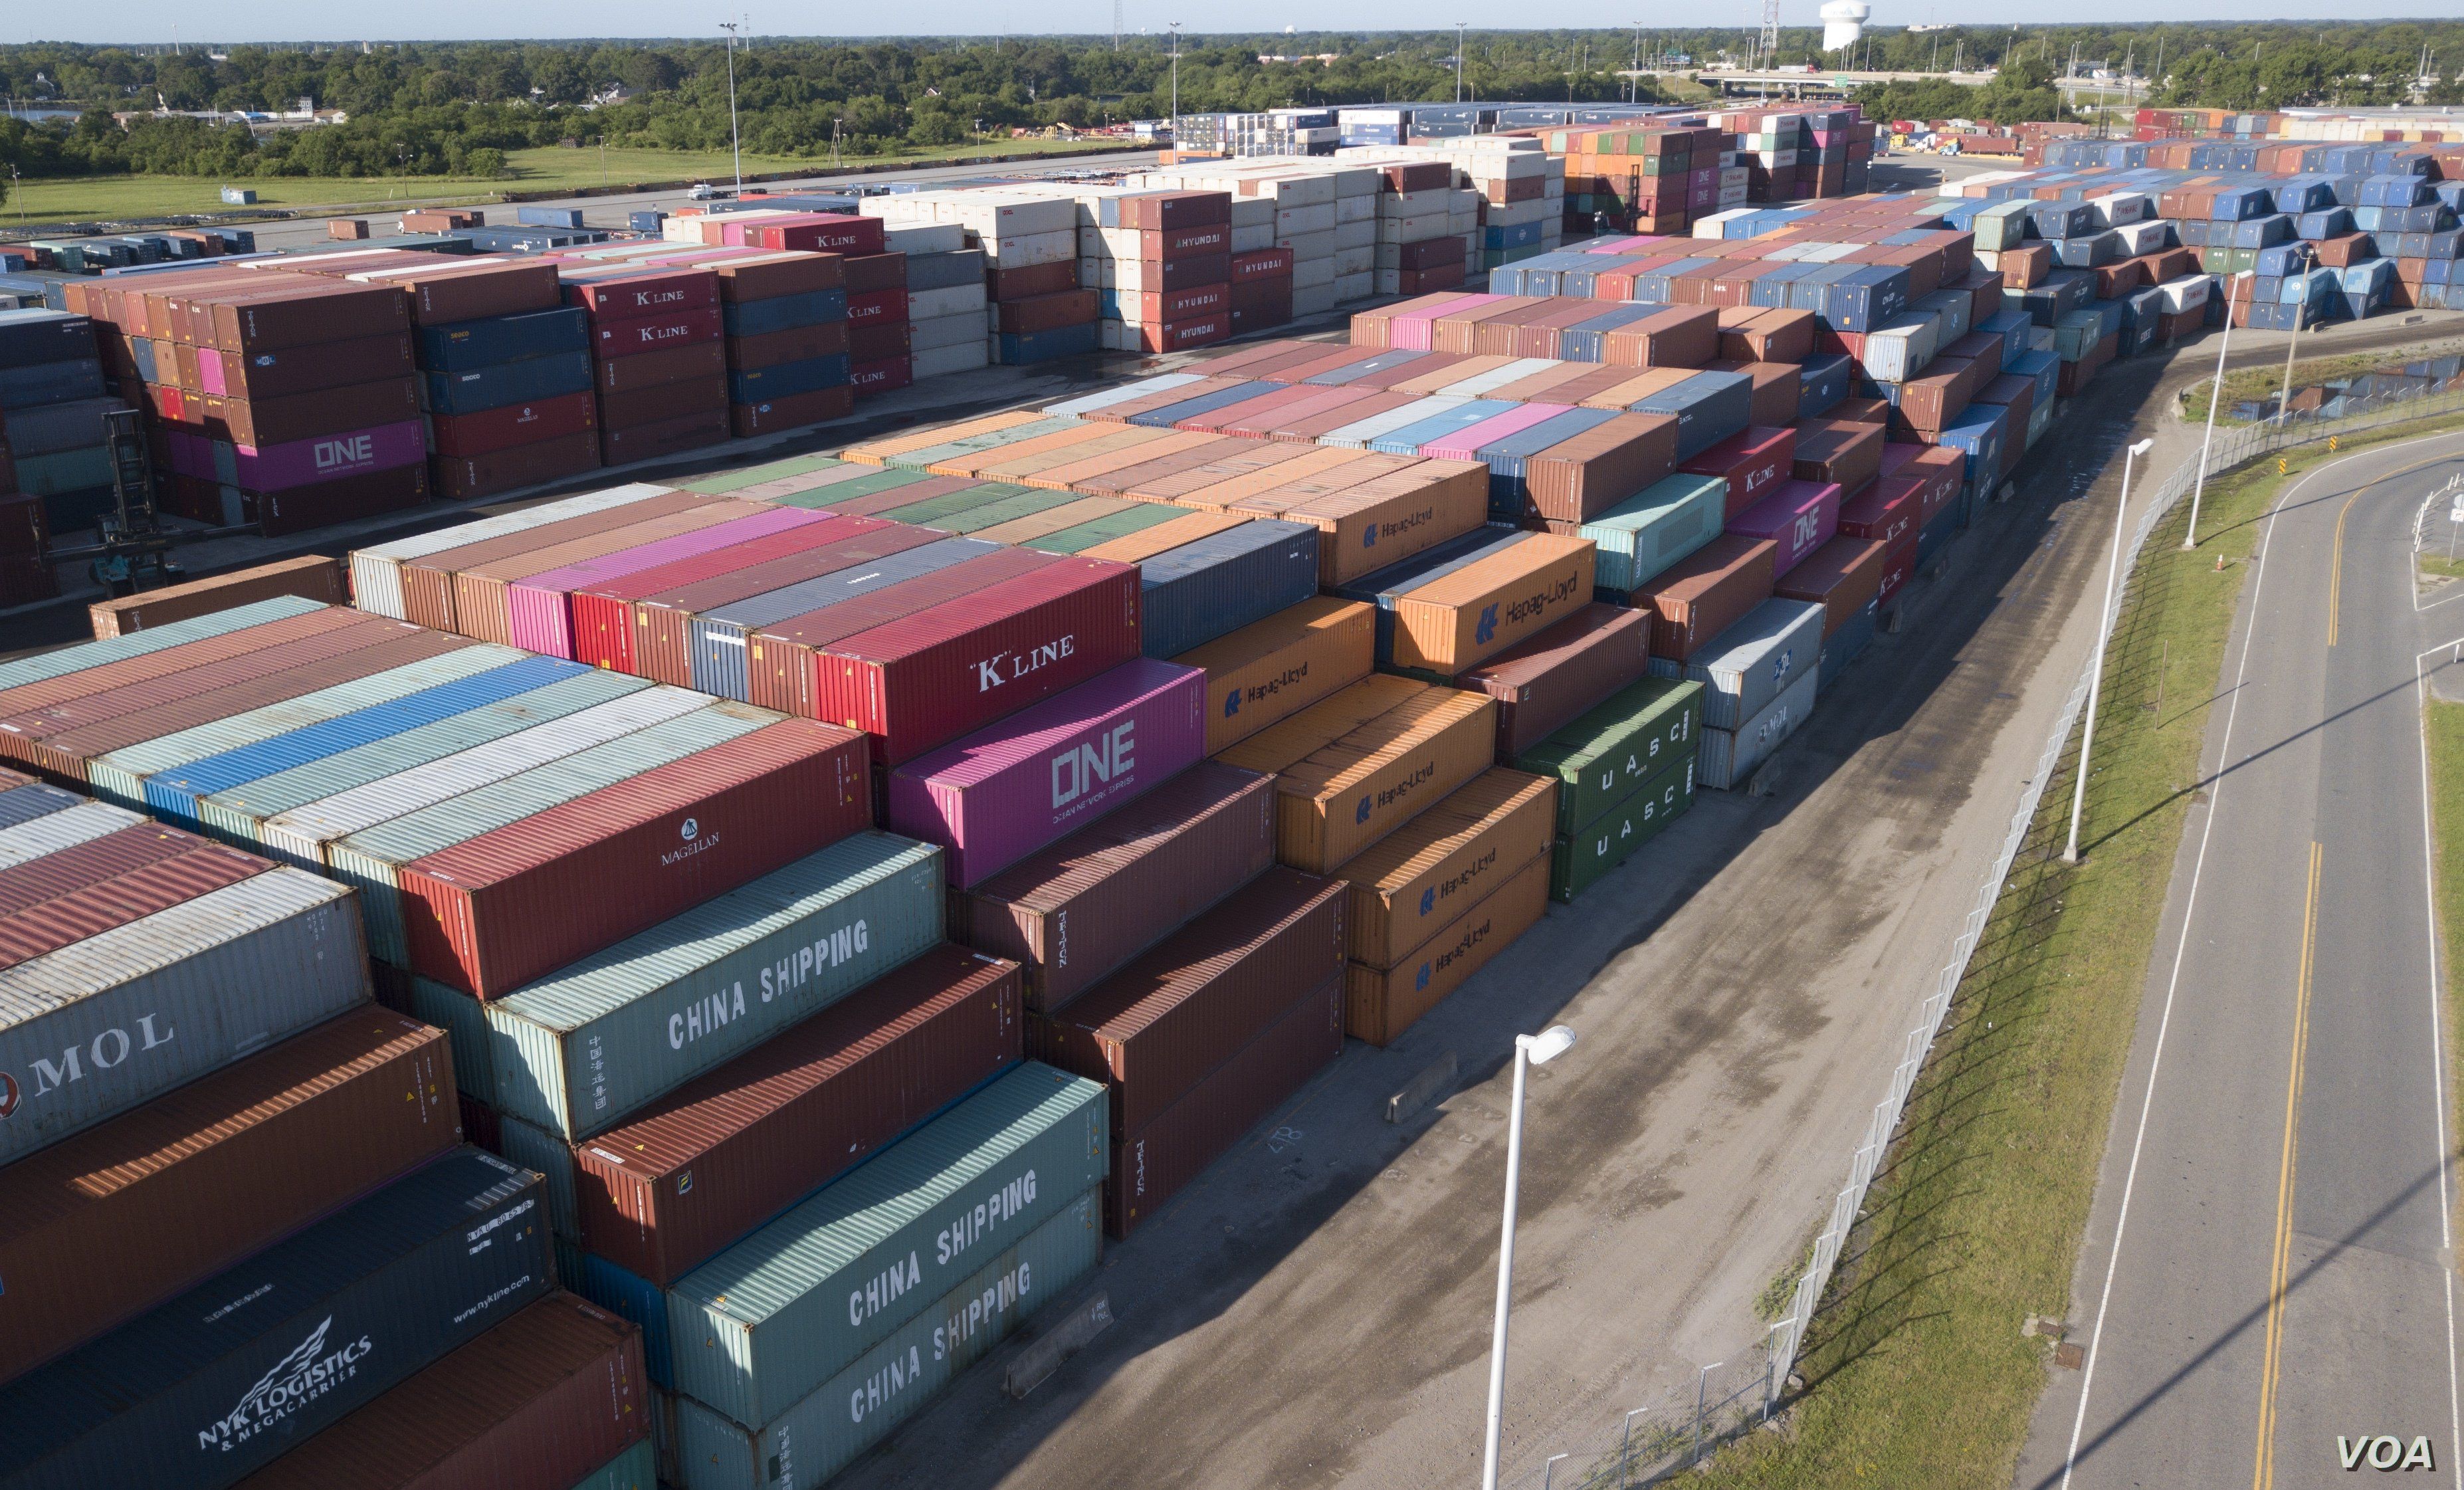 China Shipping Company and other containers are stacked at the Virginia International's terminal in Portsmouth, Va., May 10, 2019. 